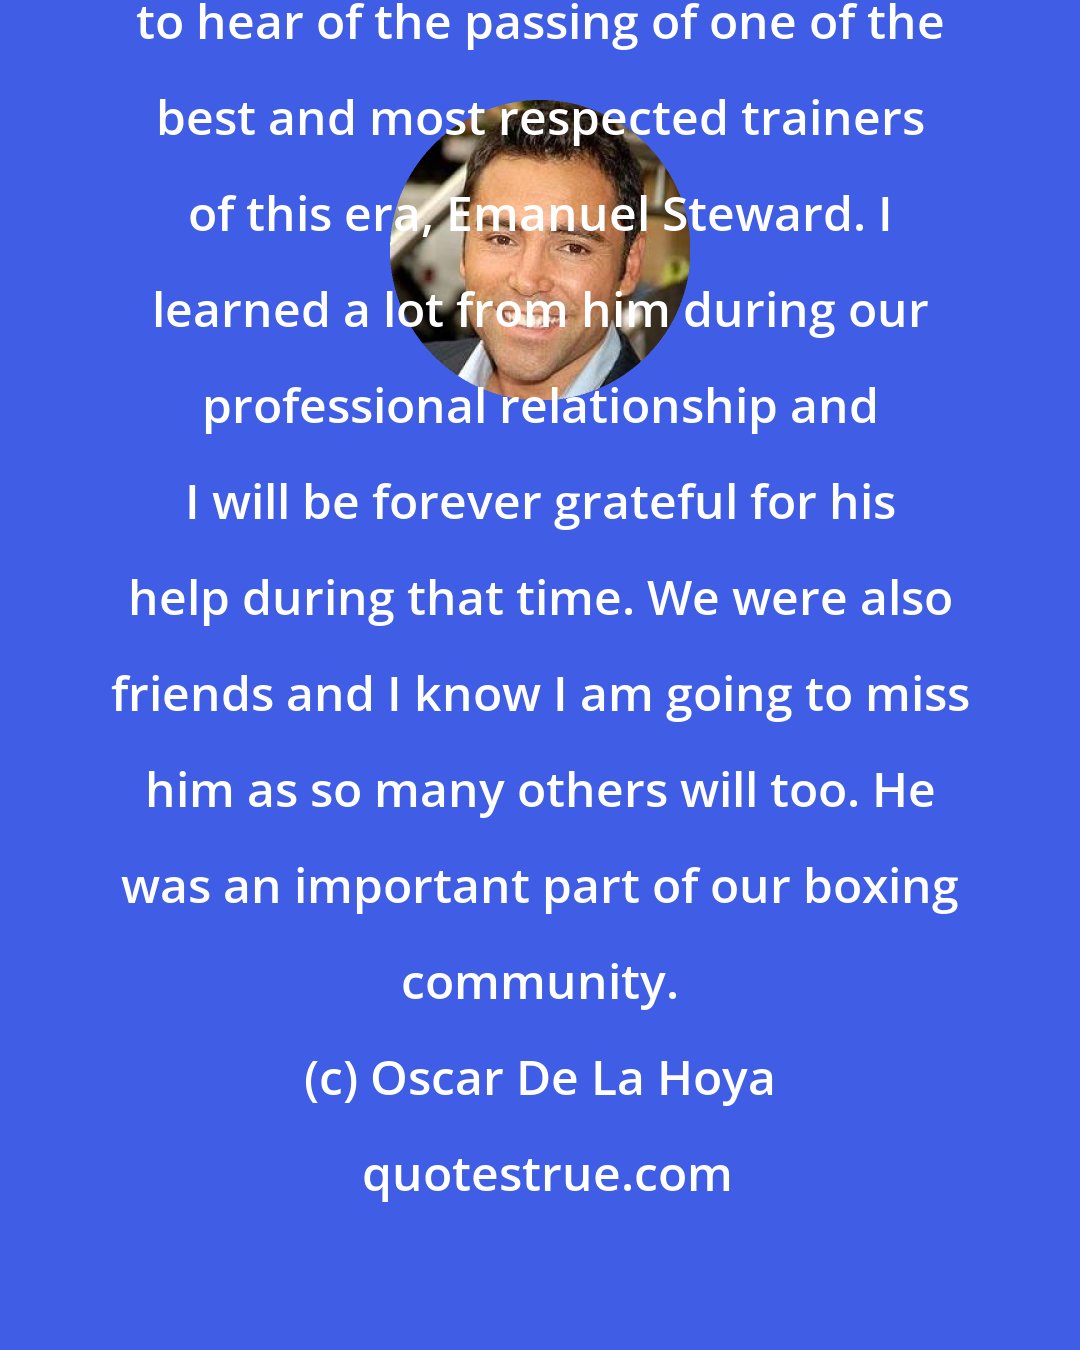 Oscar De La Hoya: It brings me great grief and sadness to hear of the passing of one of the best and most respected trainers of this era, Emanuel Steward. I learned a lot from him during our professional relationship and I will be forever grateful for his help during that time. We were also friends and I know I am going to miss him as so many others will too. He was an important part of our boxing community.